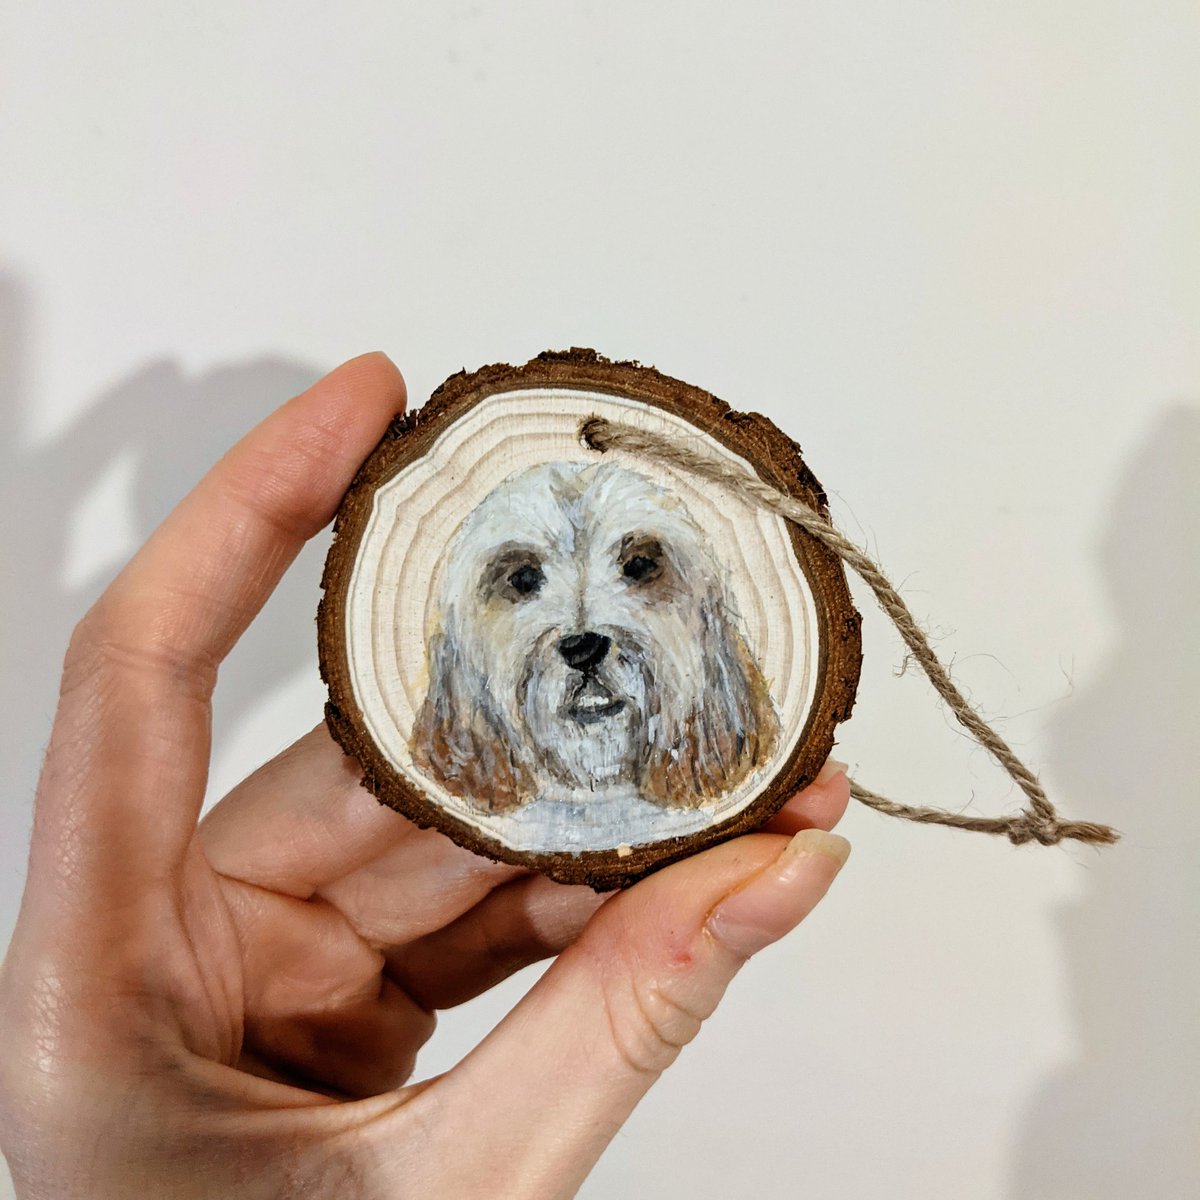 It's been such a good week for orders for these pet tree decorations! 😍🎄✨ Perfect special gift to give to a pet owner! 💝 #handmadehour
#petportrait #treedecoration #illustration